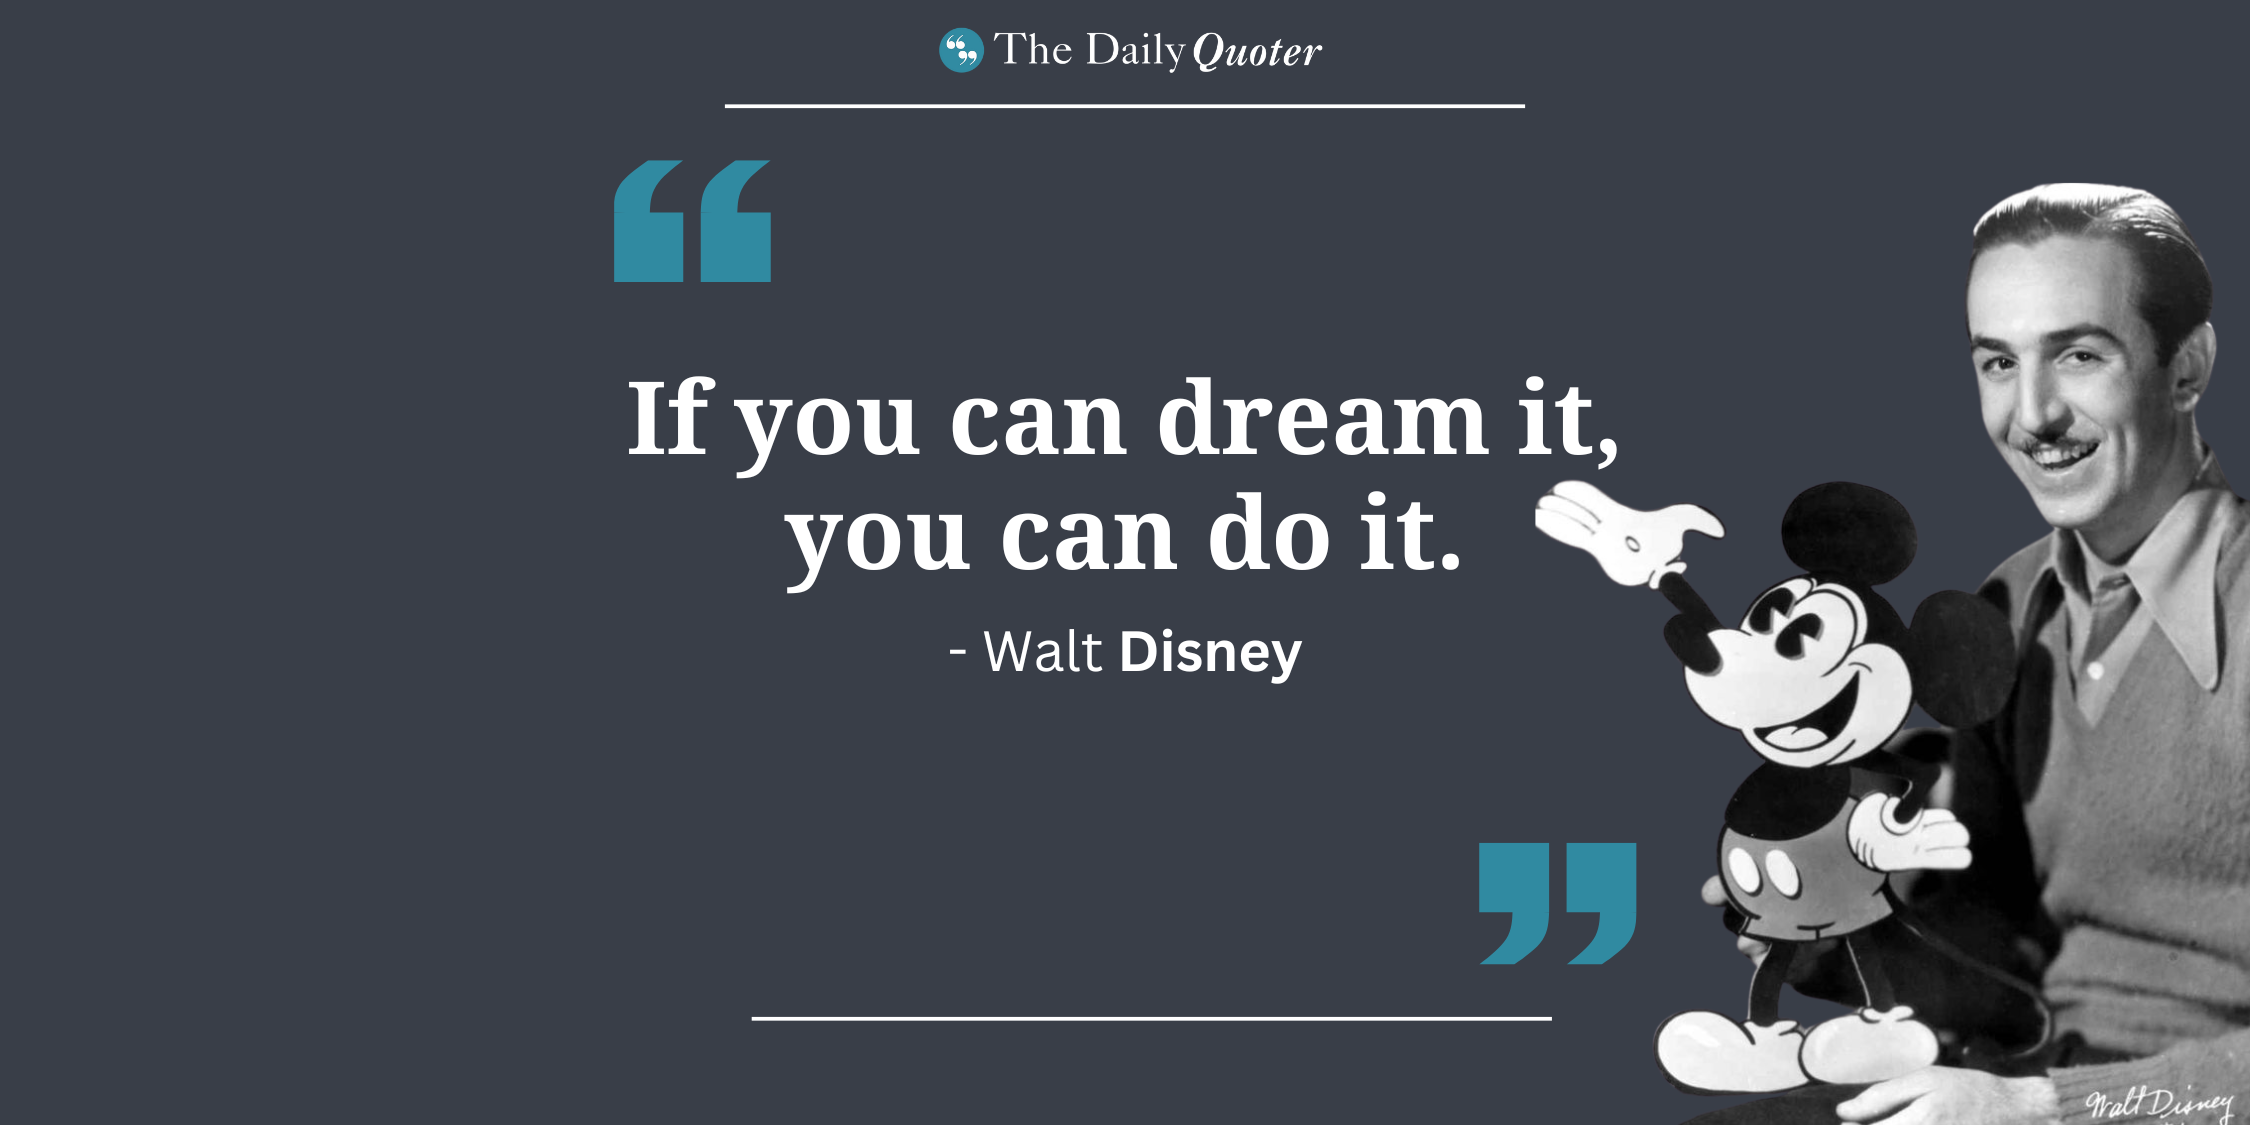 "If You Can Dream It, You Can Do It": The Misunderstood Magic of Walt Disney's (Almost) Quote